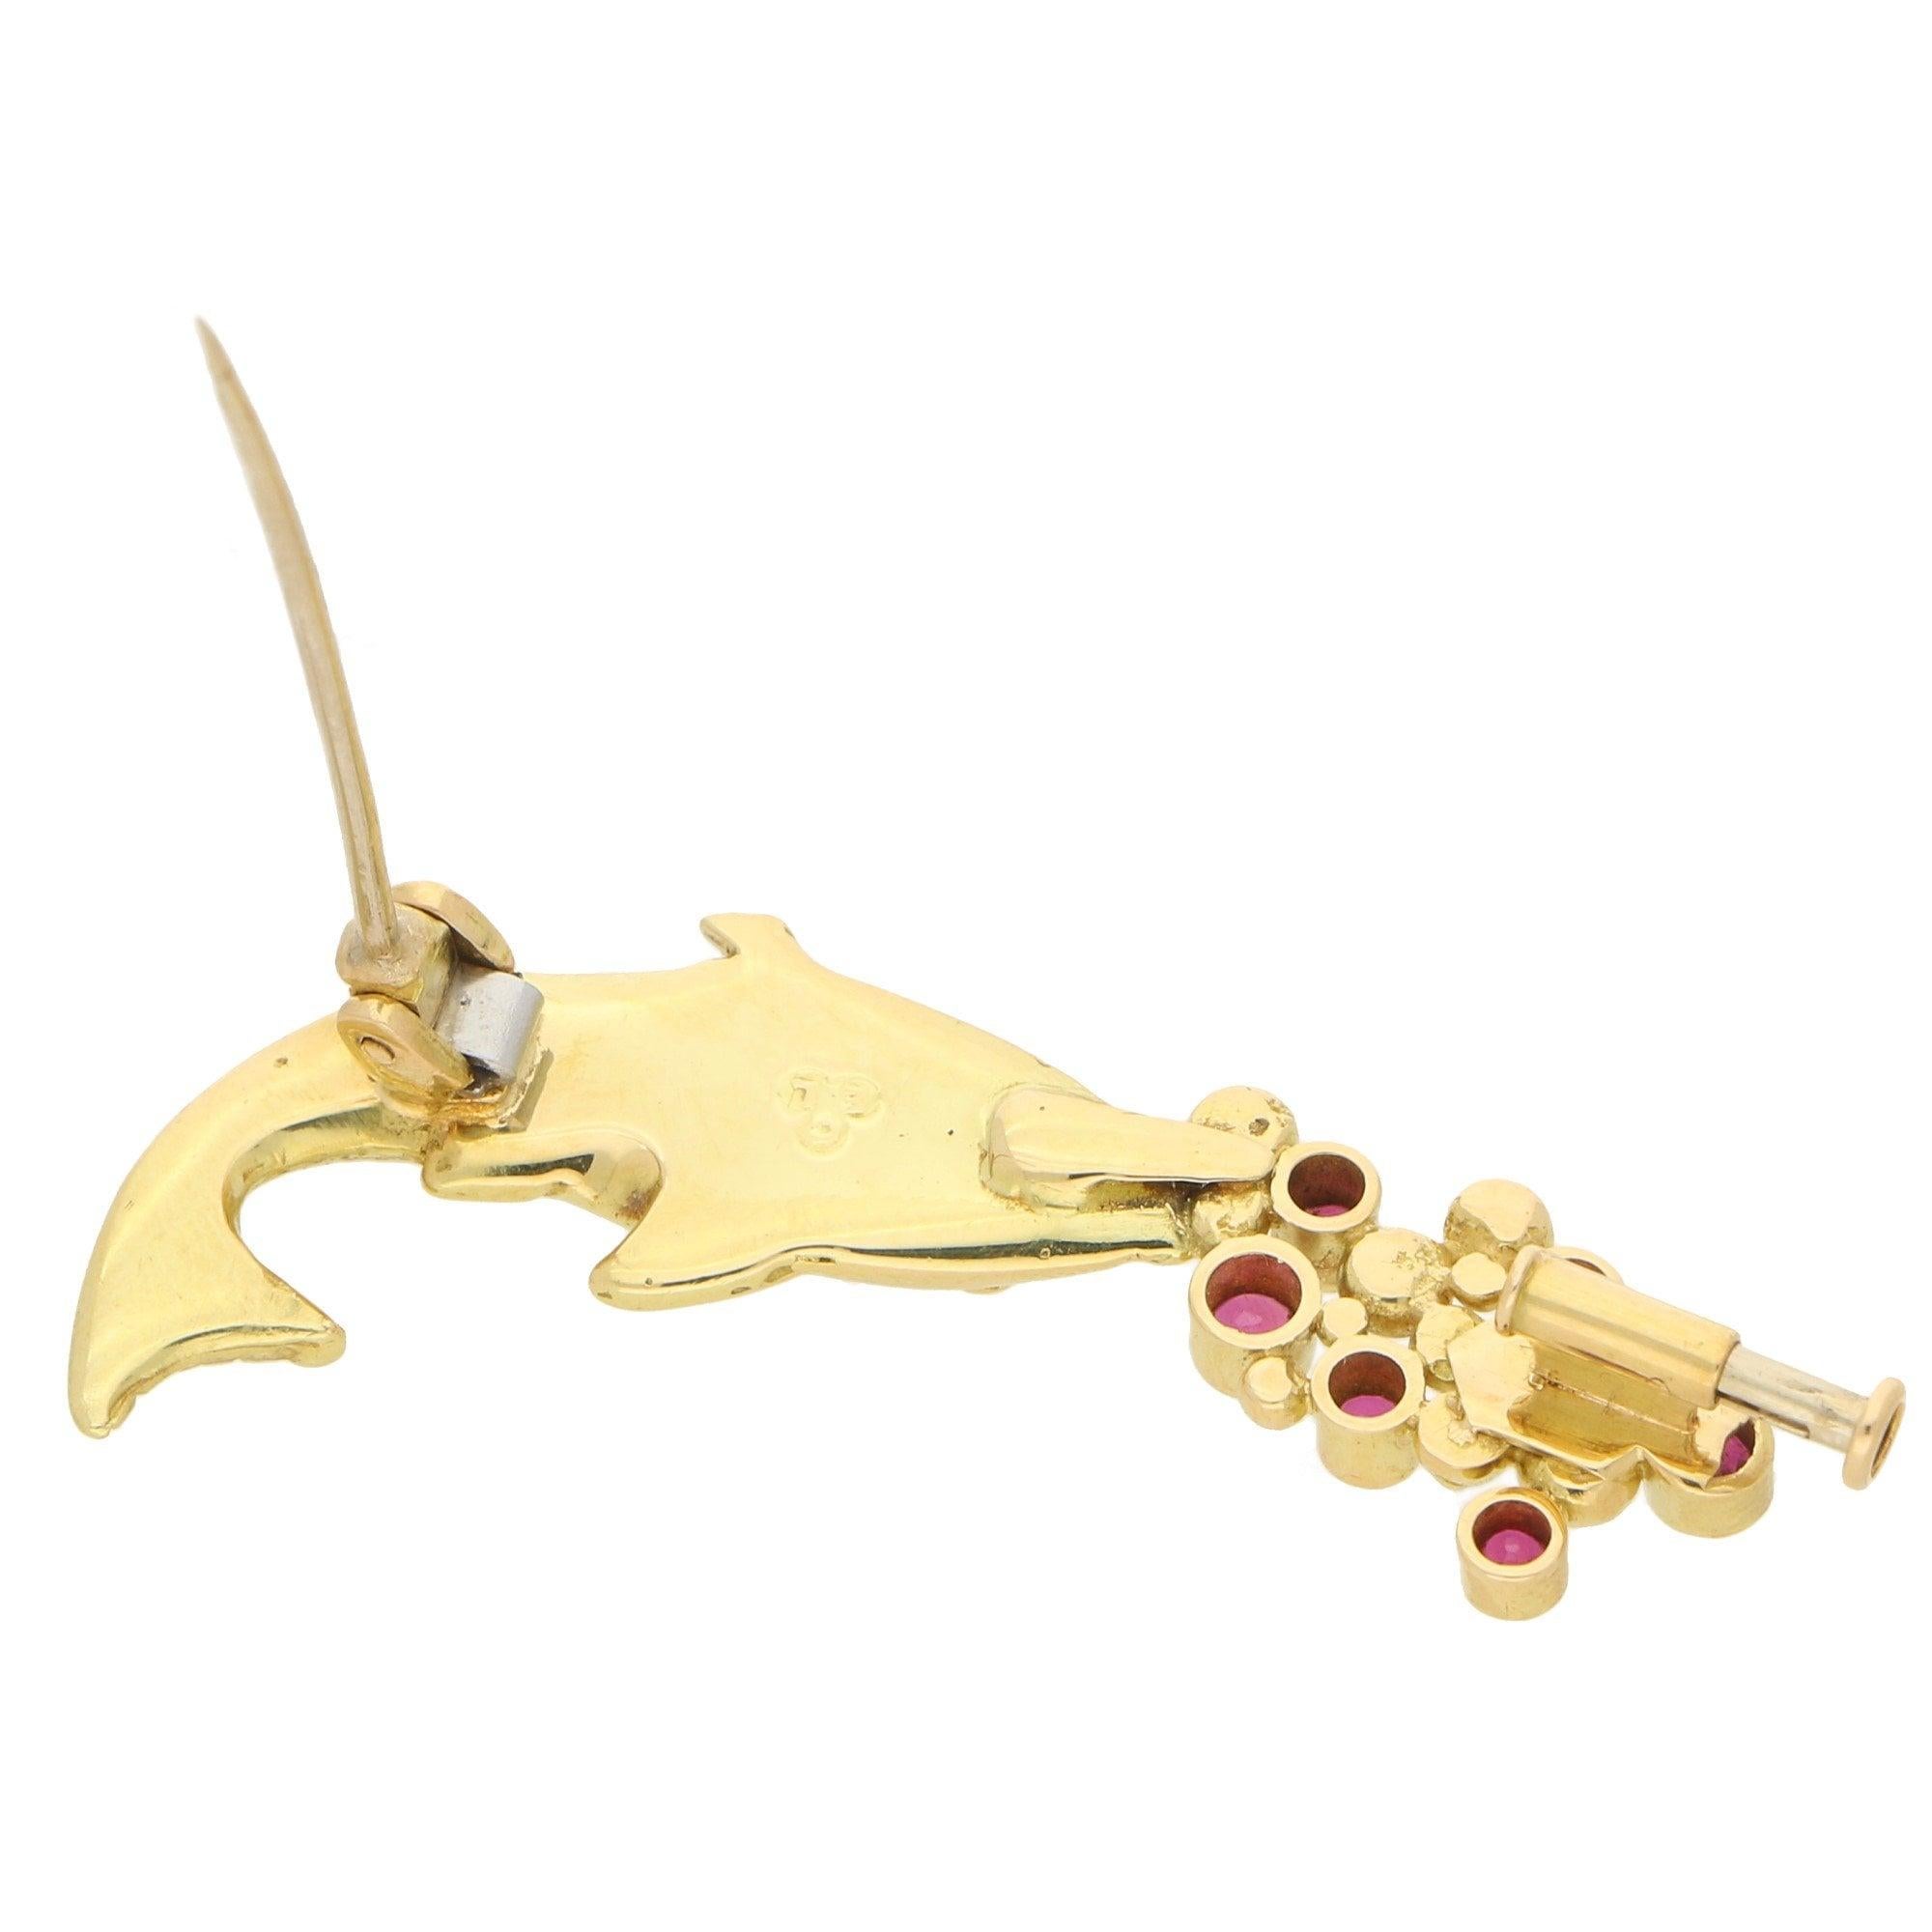 An extremely charming Mecan Elde ruby and diamond fish brooch set in 18k yellow gold, circa 1990. 

This quirky piece depicts a swimming fish and has been carefully hand carved to show naturalistic features such as scales and fins. The fish is